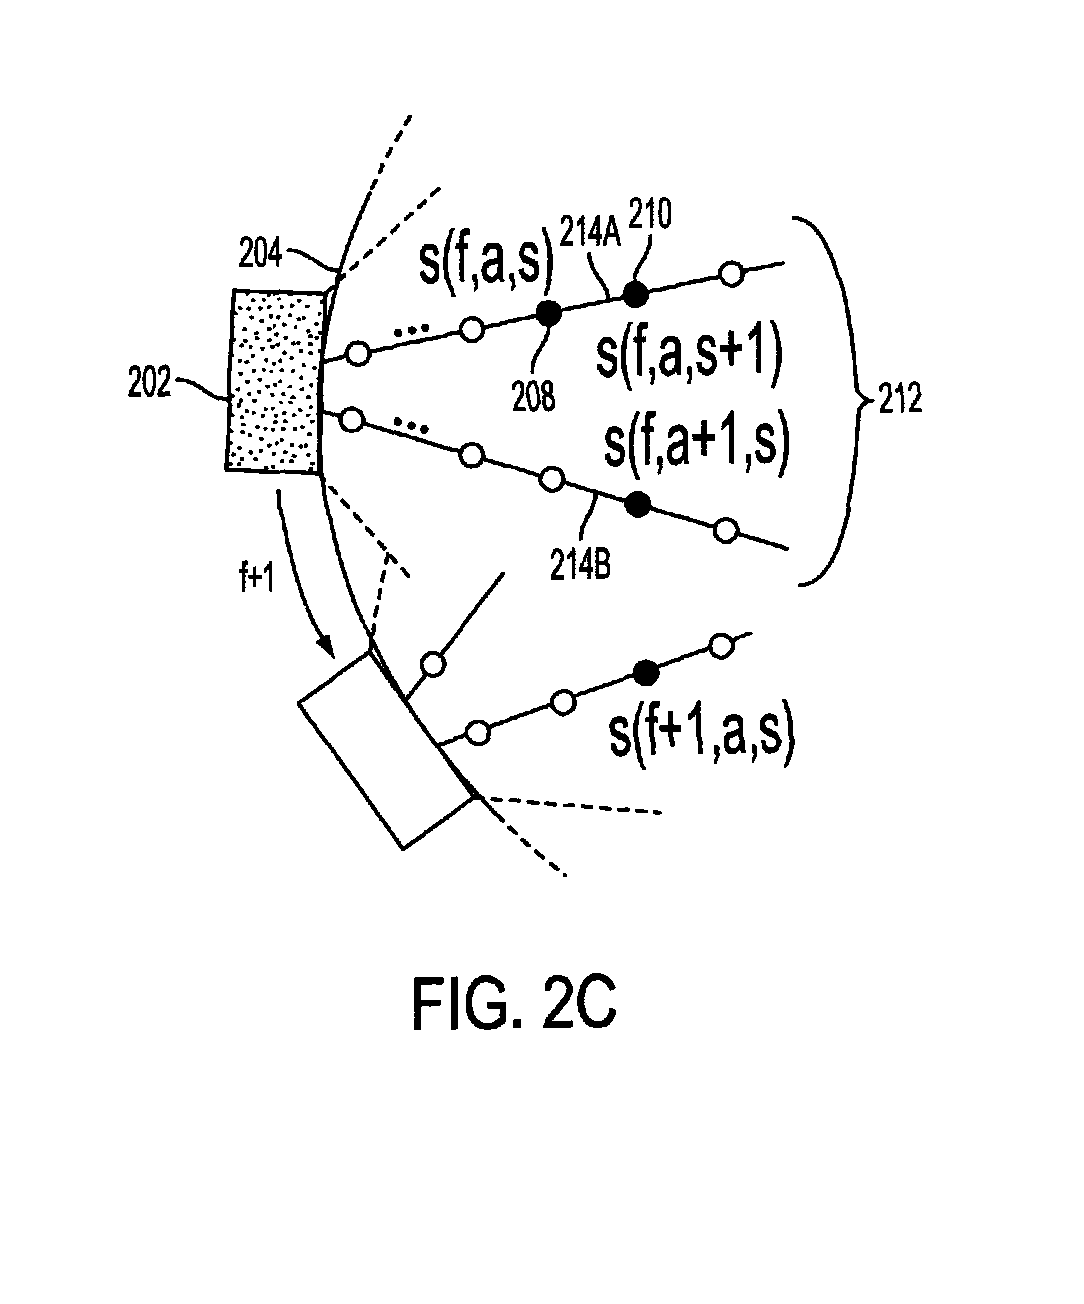 Method and apparatus for three-dimensional visualization and analysis for automatic non-destructive examination of a solid rotor using ultrasonic phased array